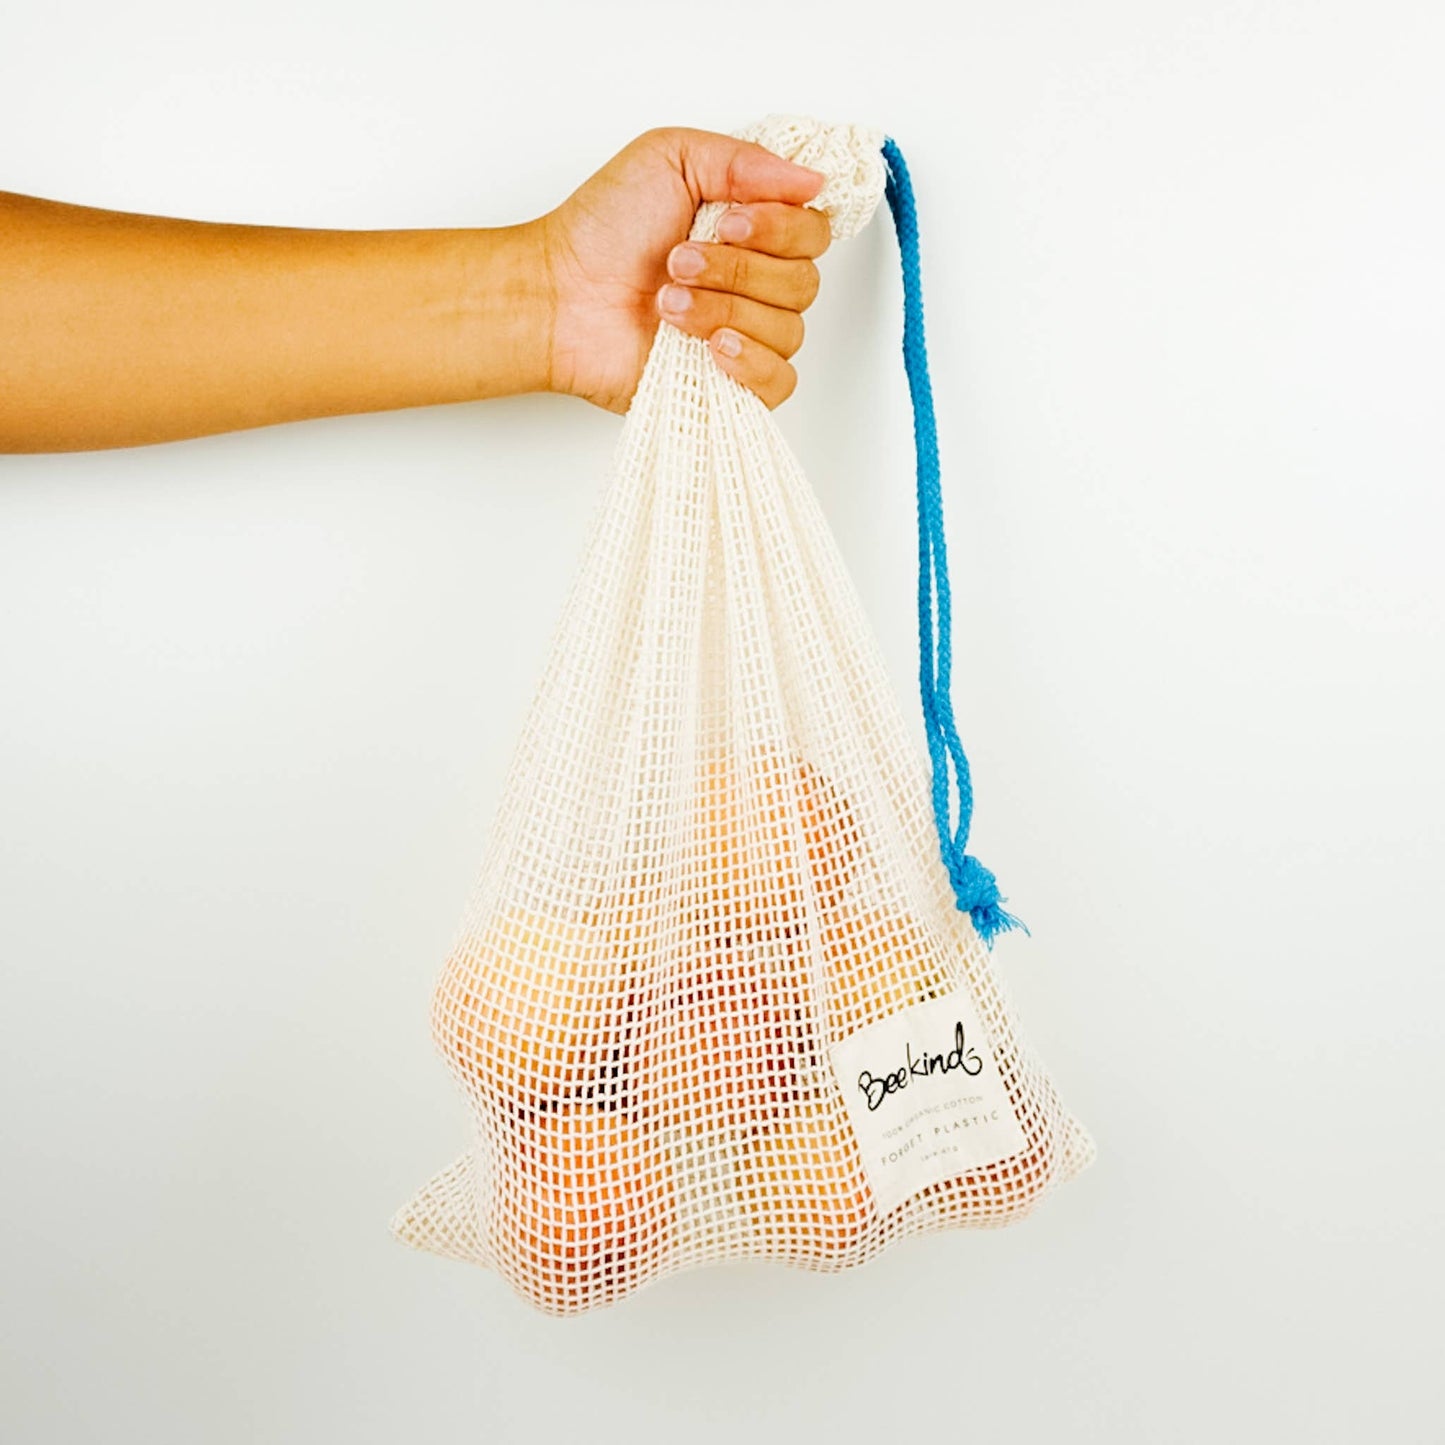 Mesh Produce Bags - Set of 2 by Bee Kind